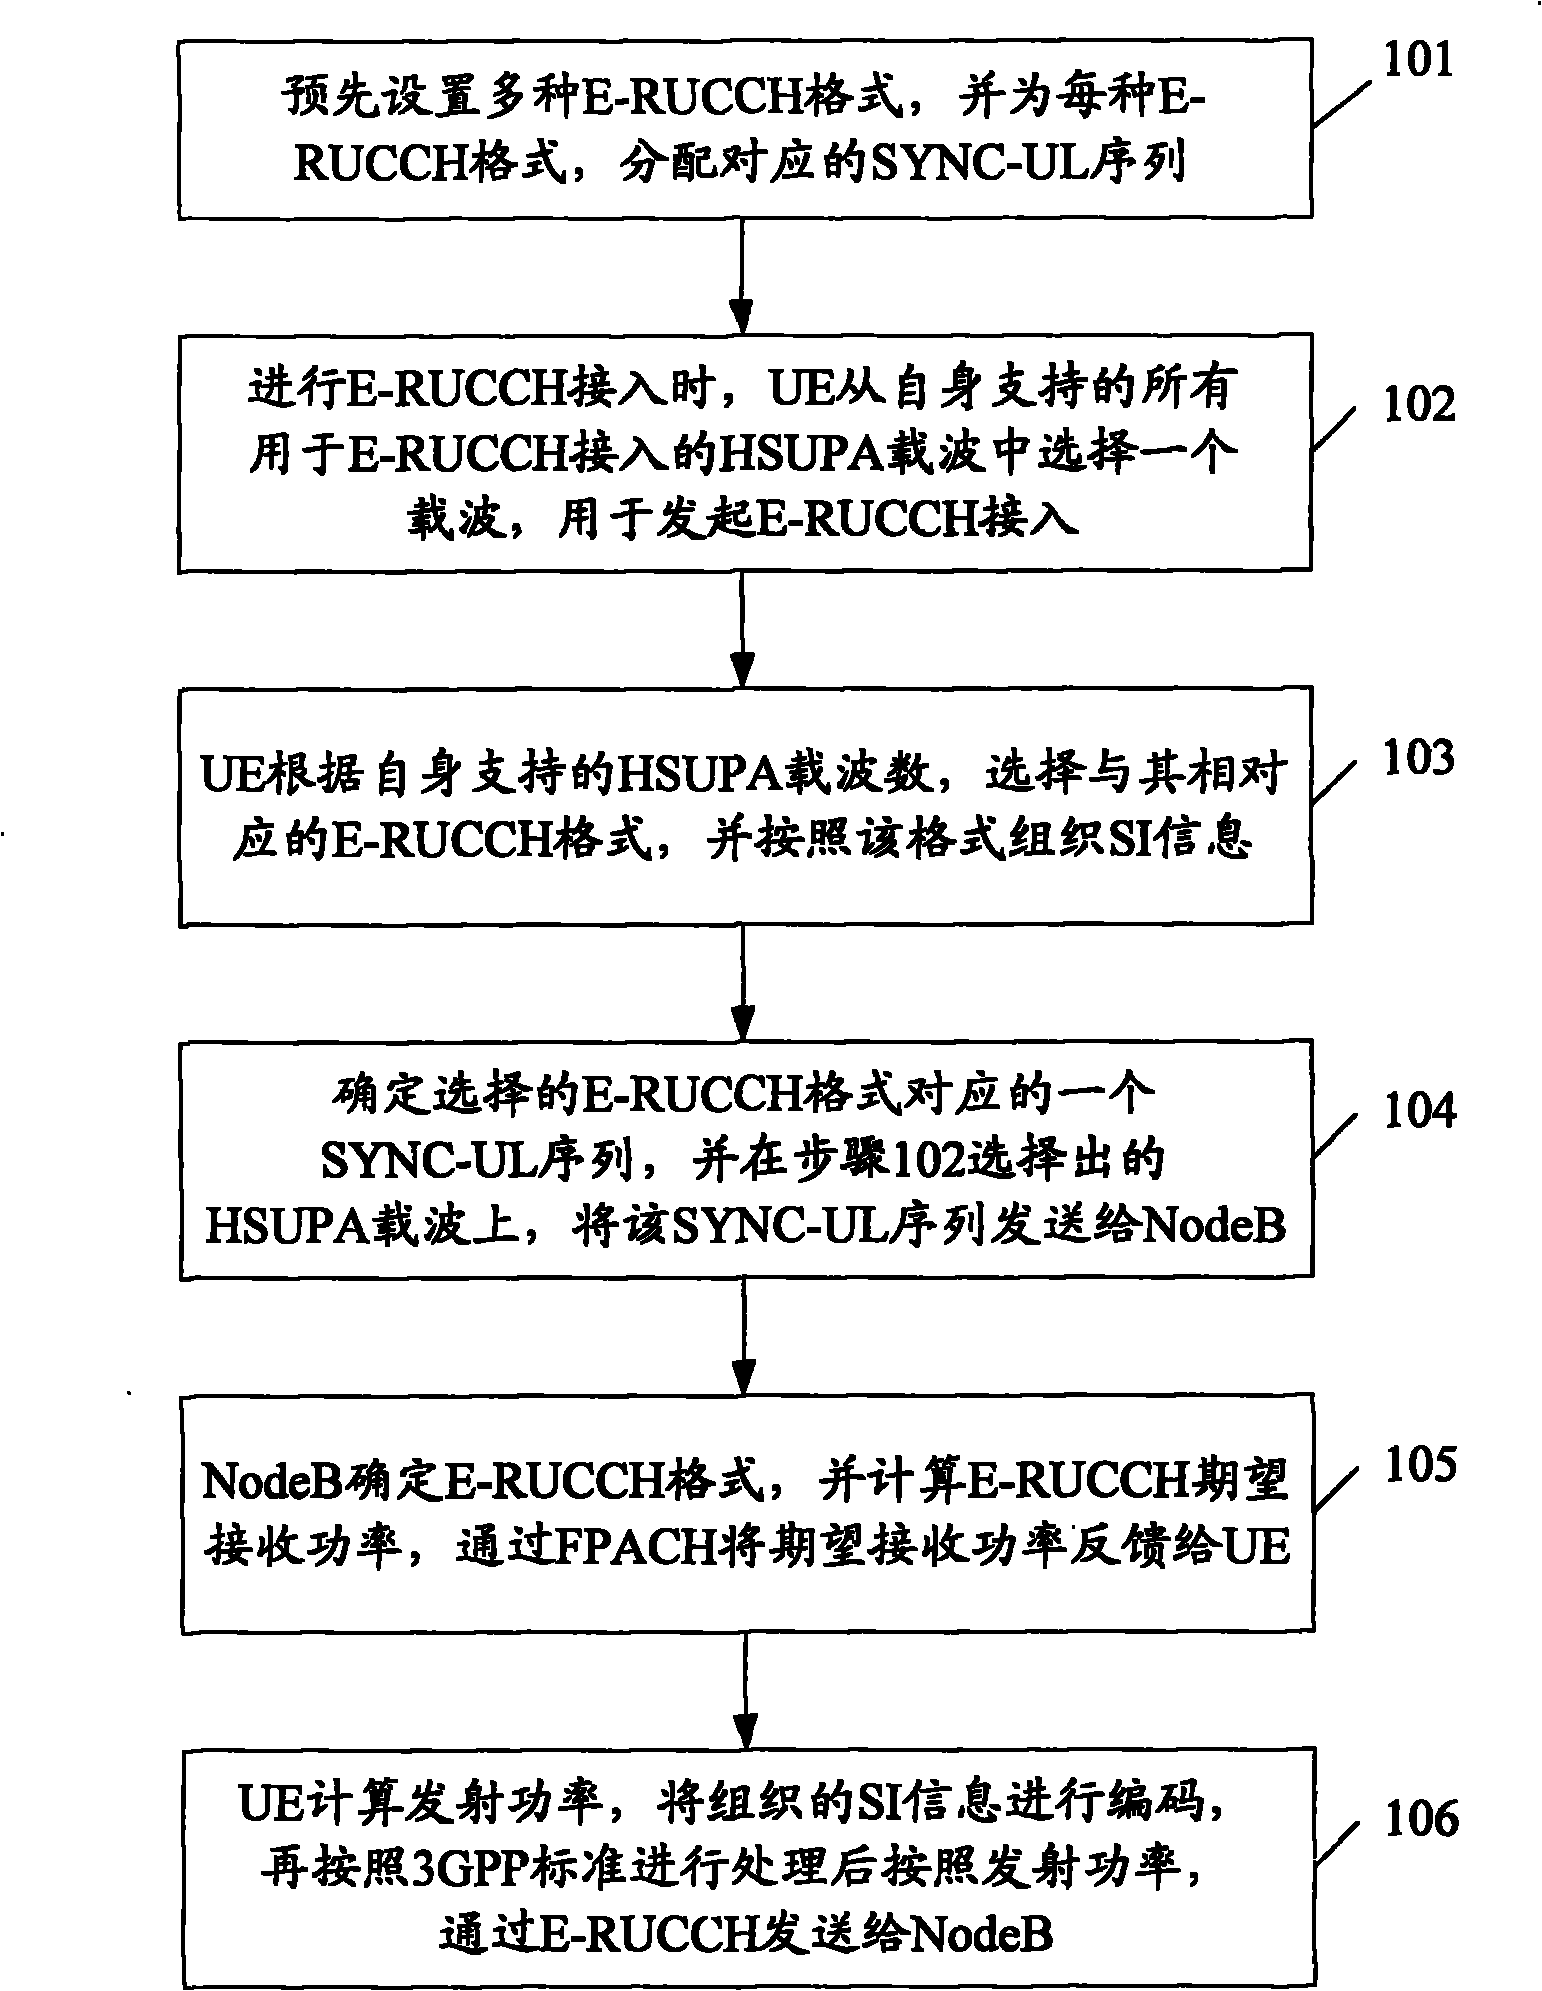 E-RUCCH (Enhanced-Random-Access Uplink Control Channel) data transmission method in multi-carrier HSUPA (High Speed Uplink Packet Access) system